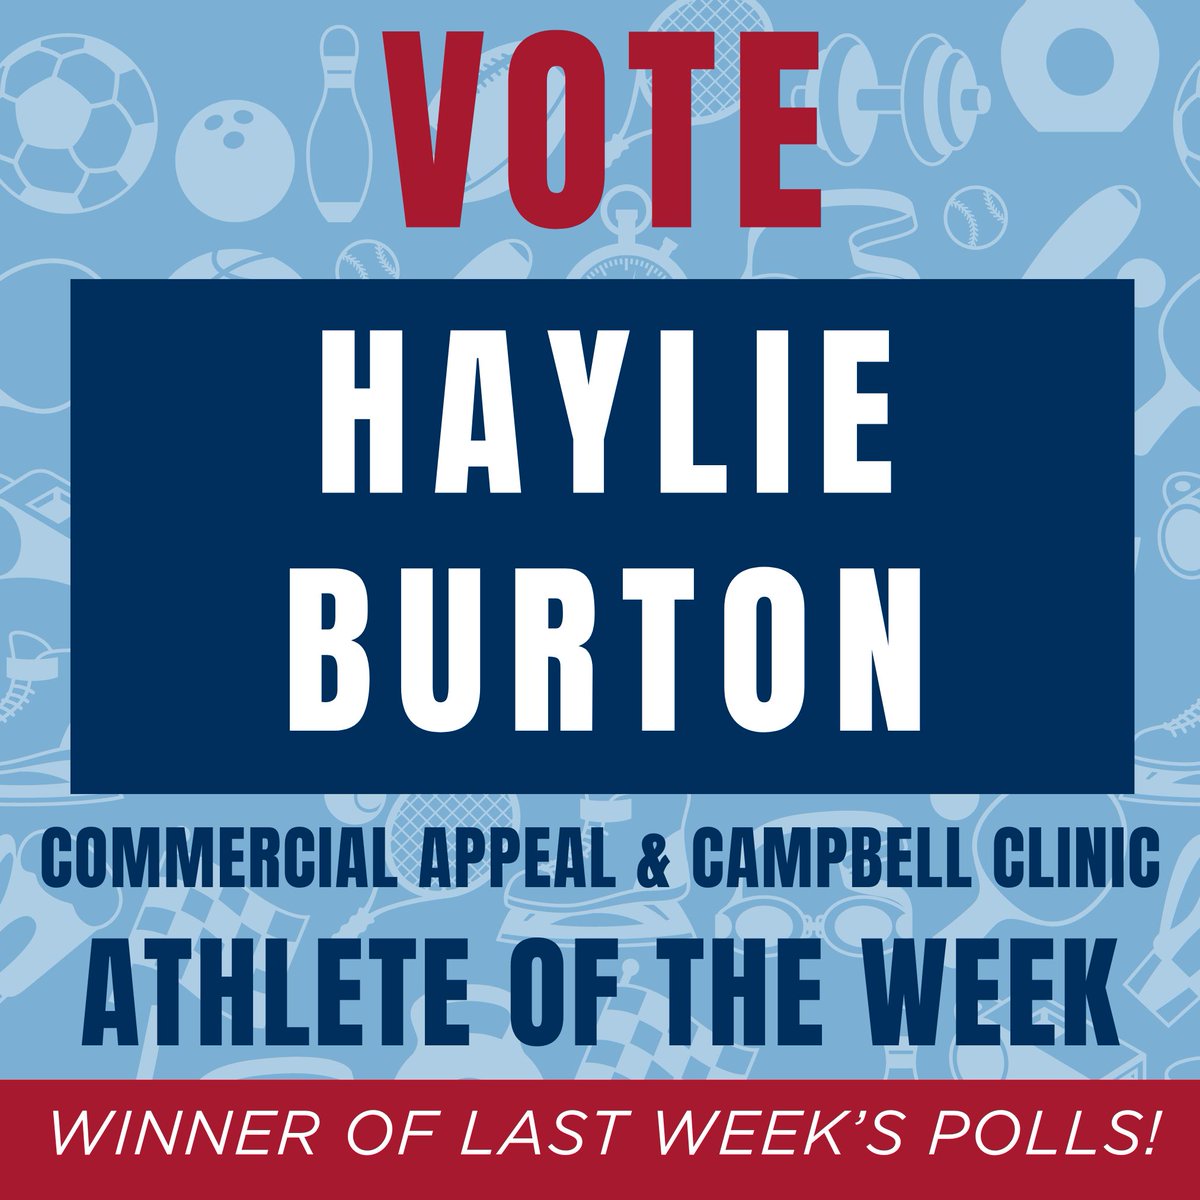 She won last week - let's help her win again! Vote Haylie Burton for this week's Commercial Appeal Girls Athlete of the Week. Vote here: commercialappeal.com/story/sports/h… Read about her win last week in the Daily Memphian: dailymemphian.com/section/sports…